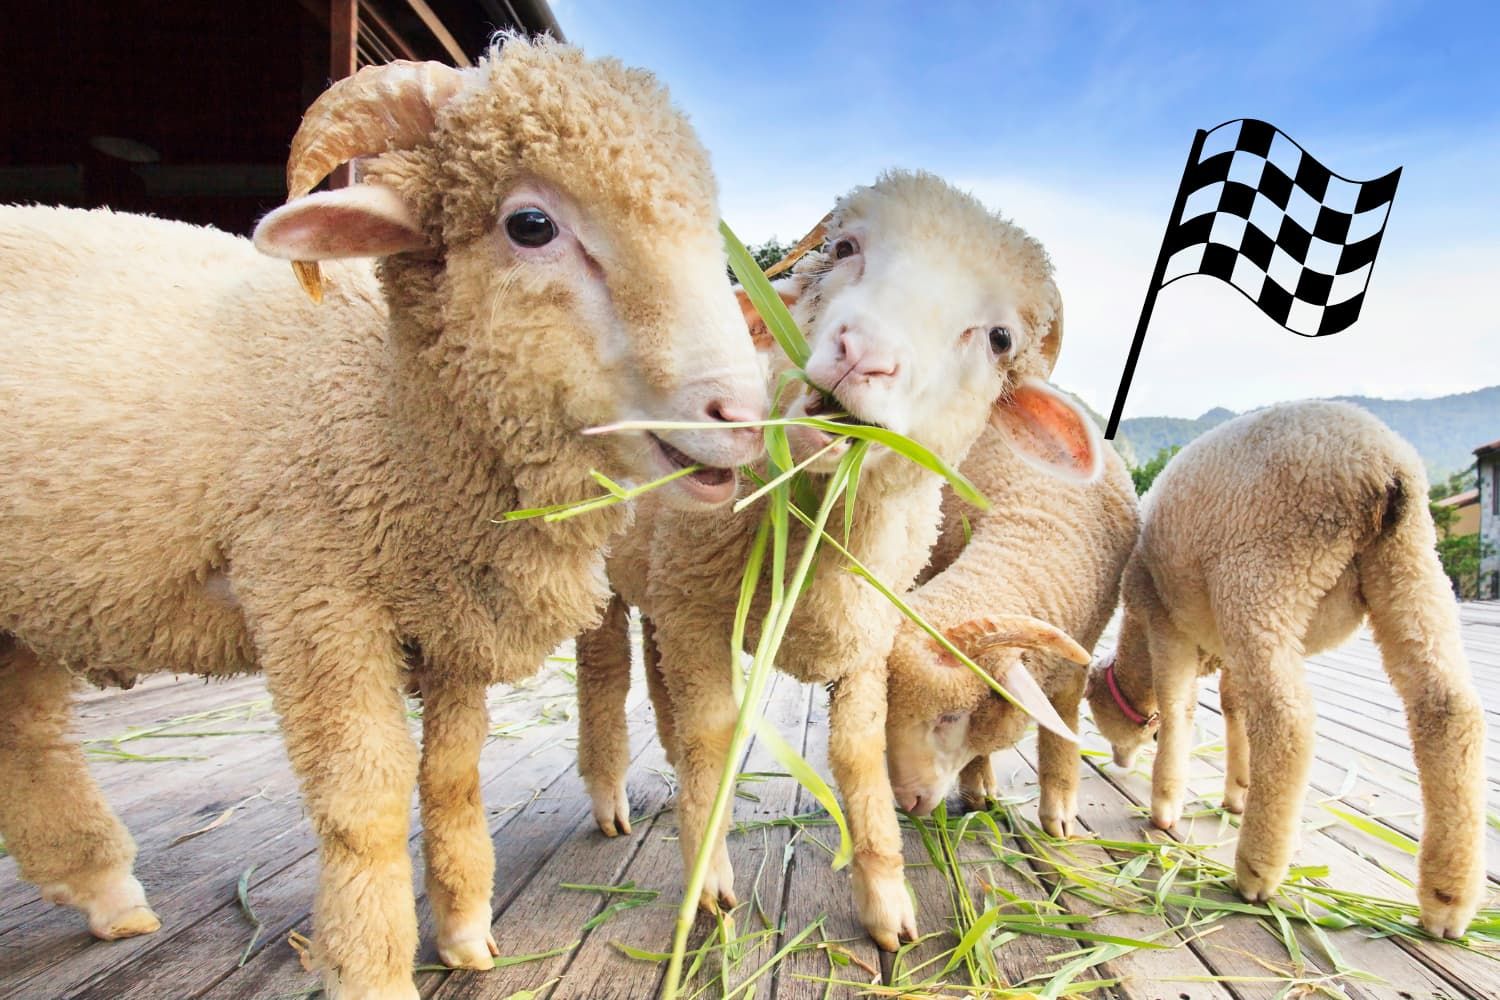 Game%20-%20OT%20Psalm%2023%20-%20The%20feed%20the%20sheep%20relay%20race-6bb58723 Psalm 23